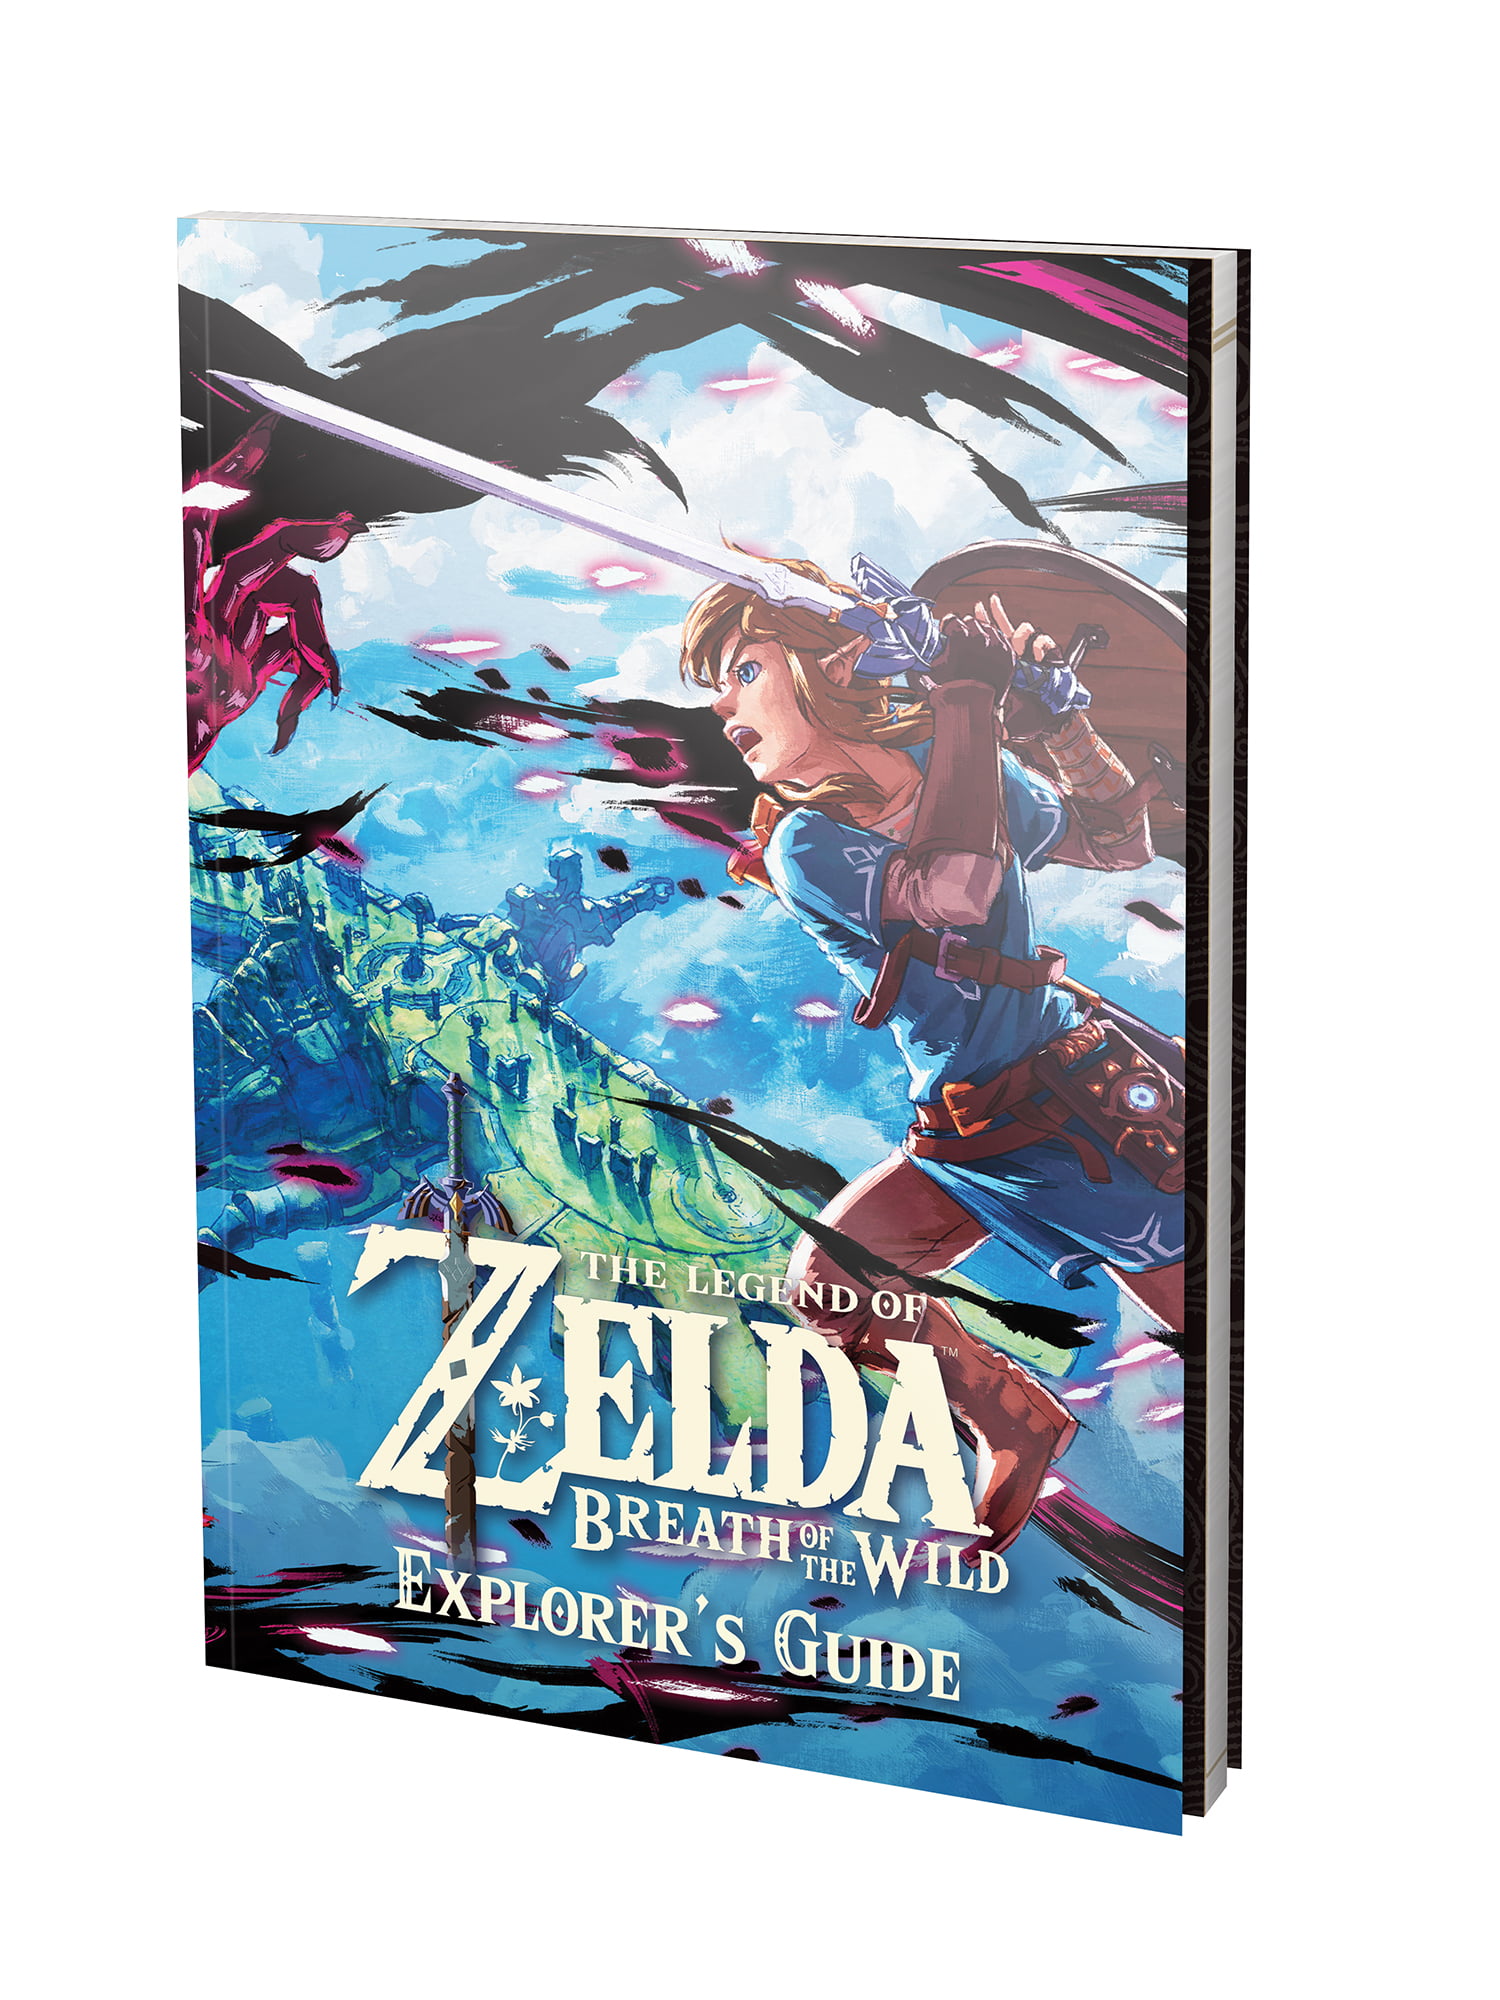 The Legend of Zelda: Breath of the Wild FAQs, Walkthroughs, and Guides for  Nintendo Switch - GameFAQs